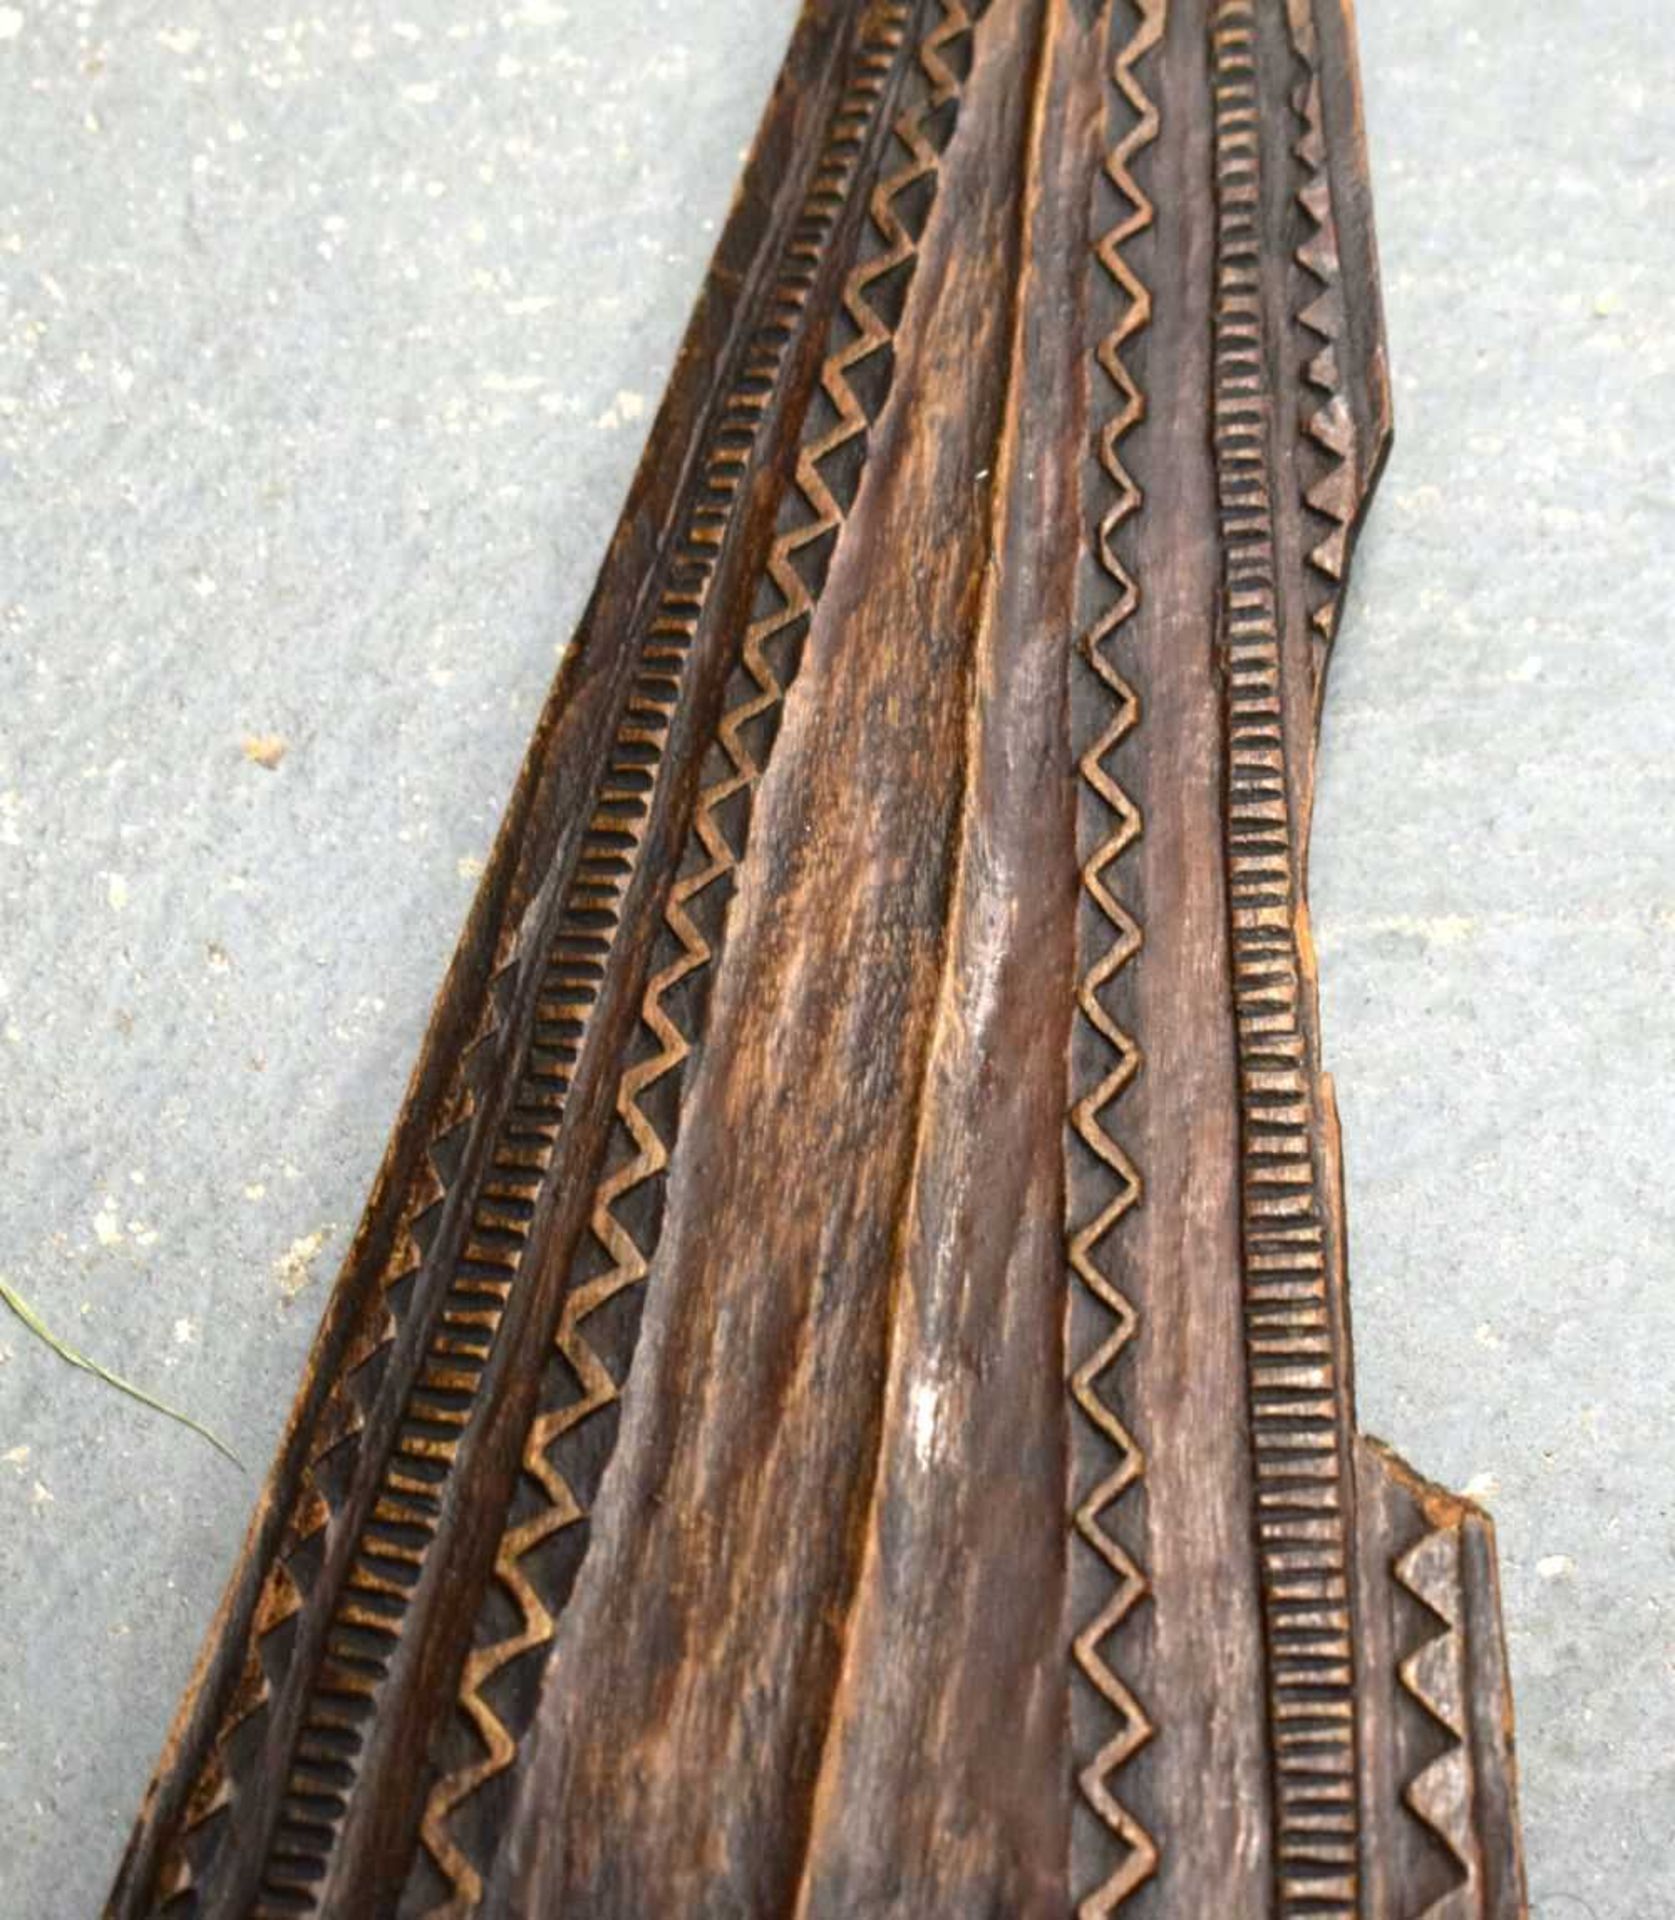 TWO AFRICAN TRIBAL CARVED WOOD PADDLES one decorated with animals, the other with motifs. 160 cm - Image 5 of 13